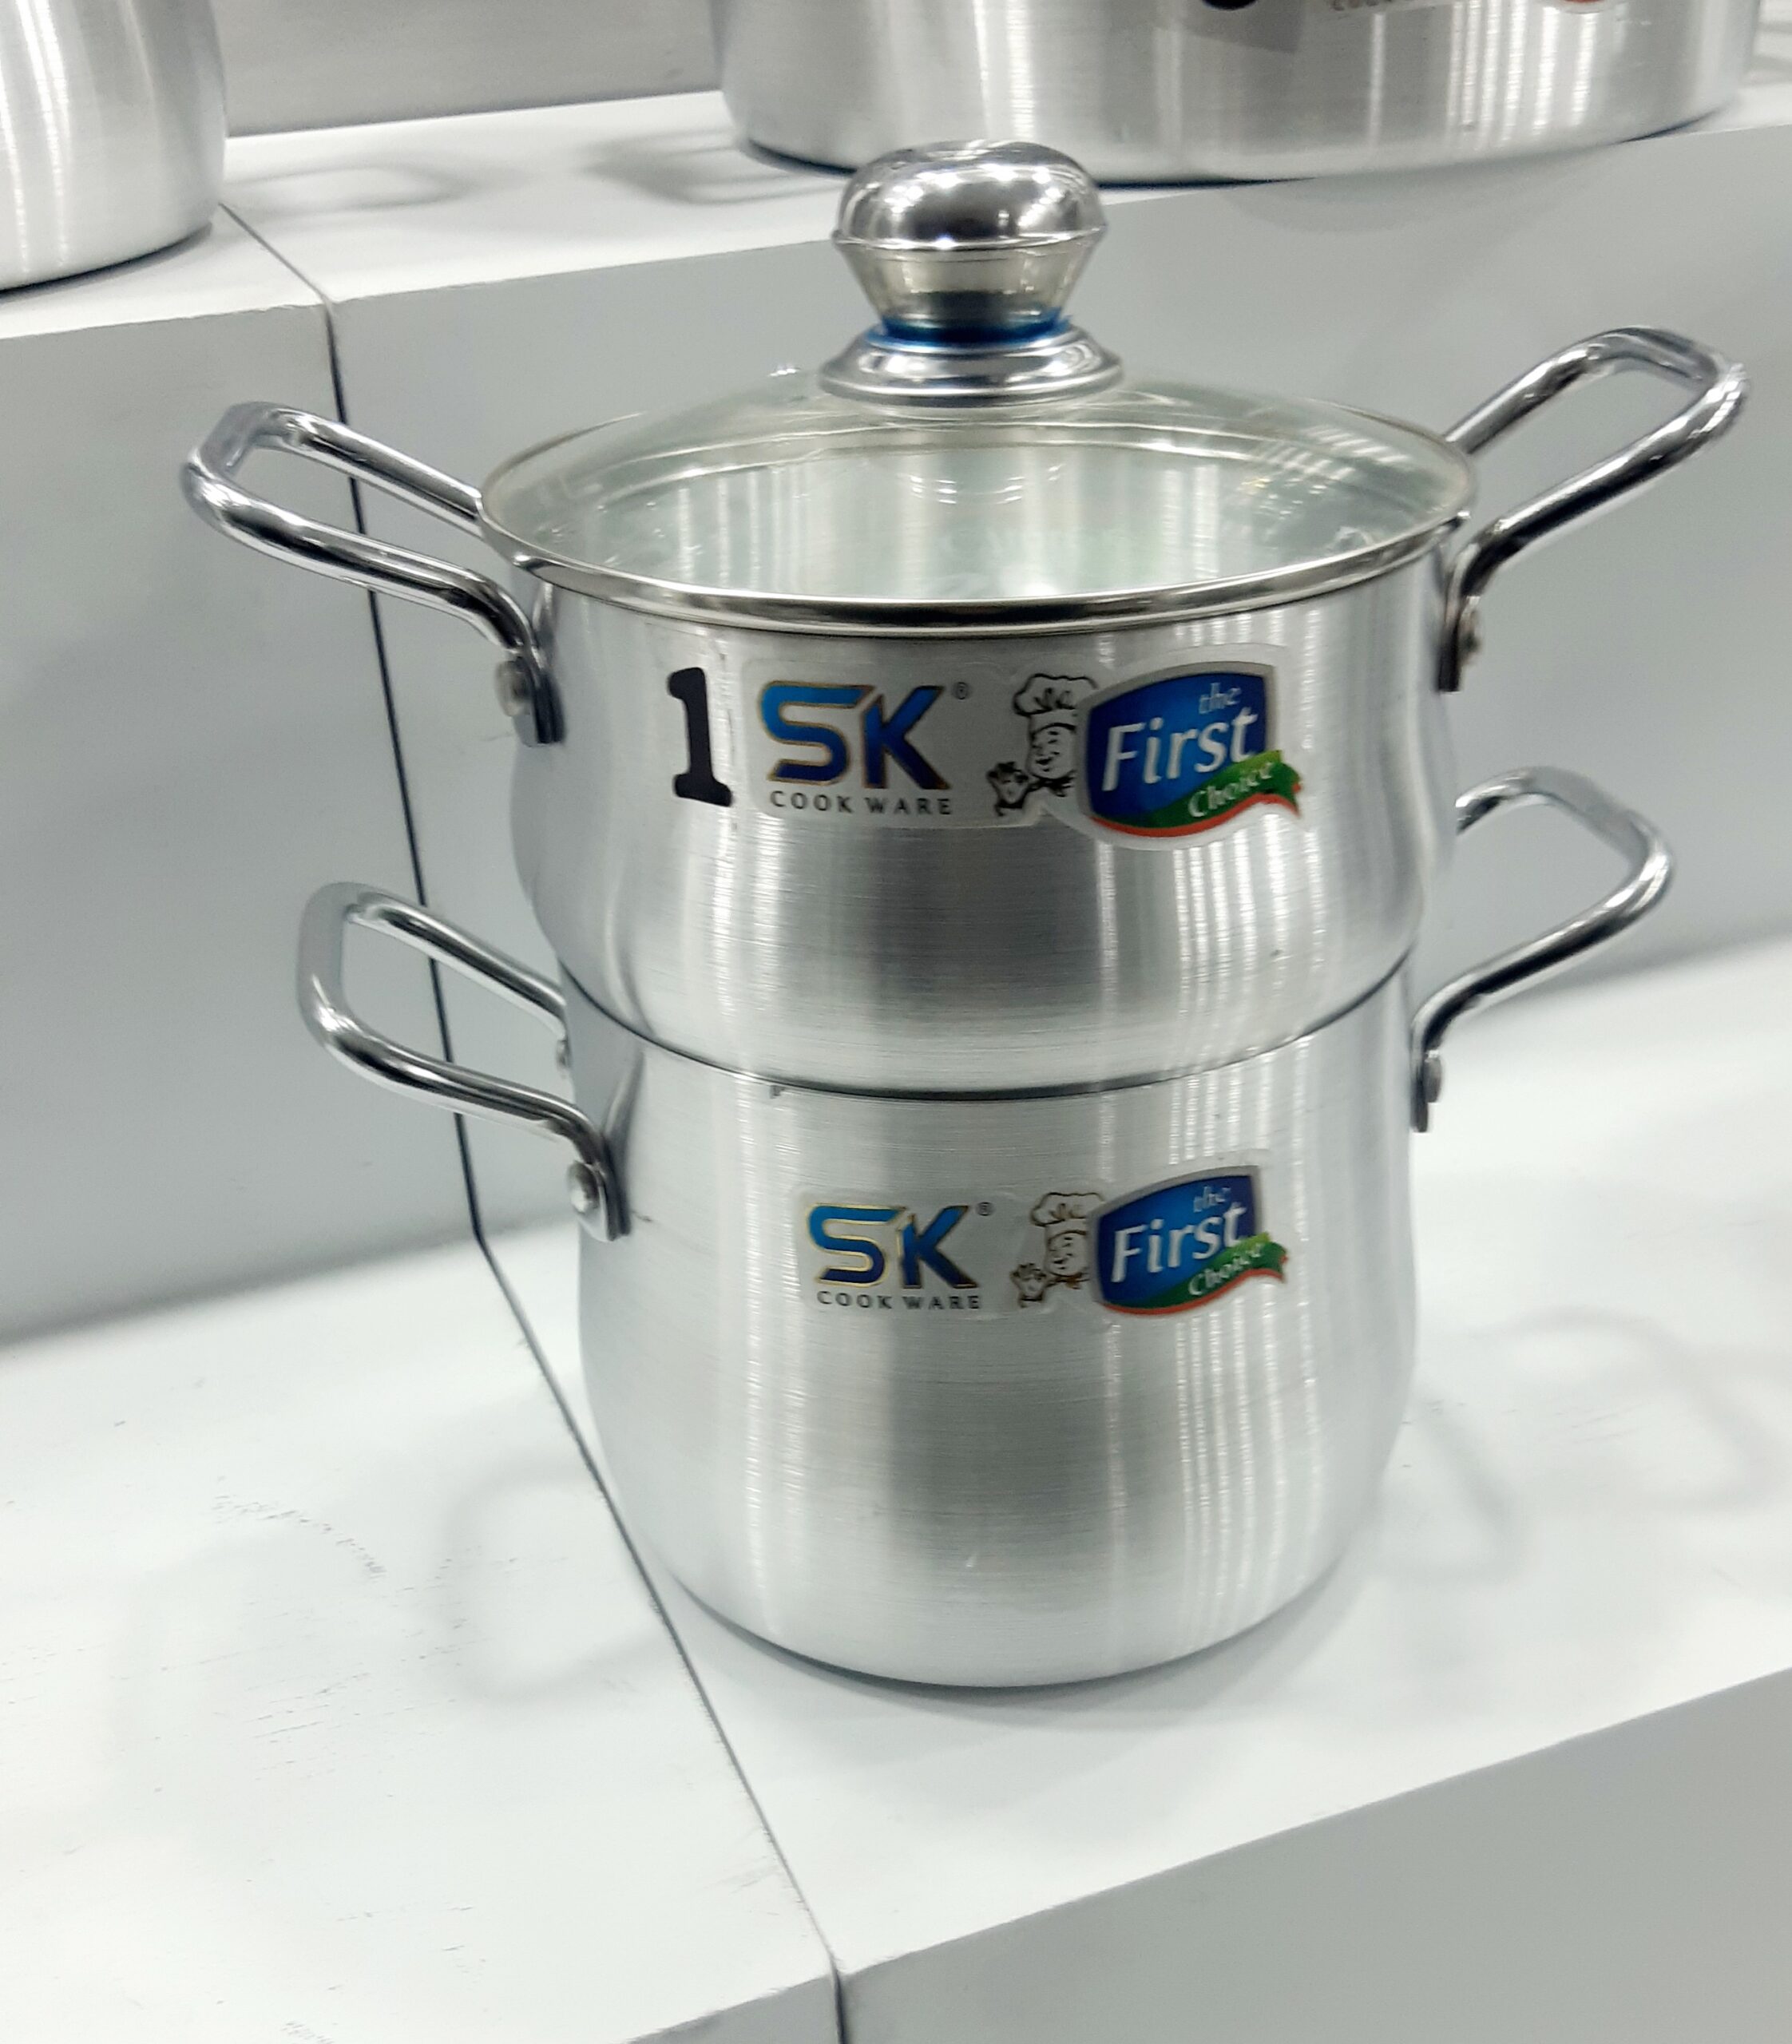 SK CookWare Steamer 2 Price in Pakistan